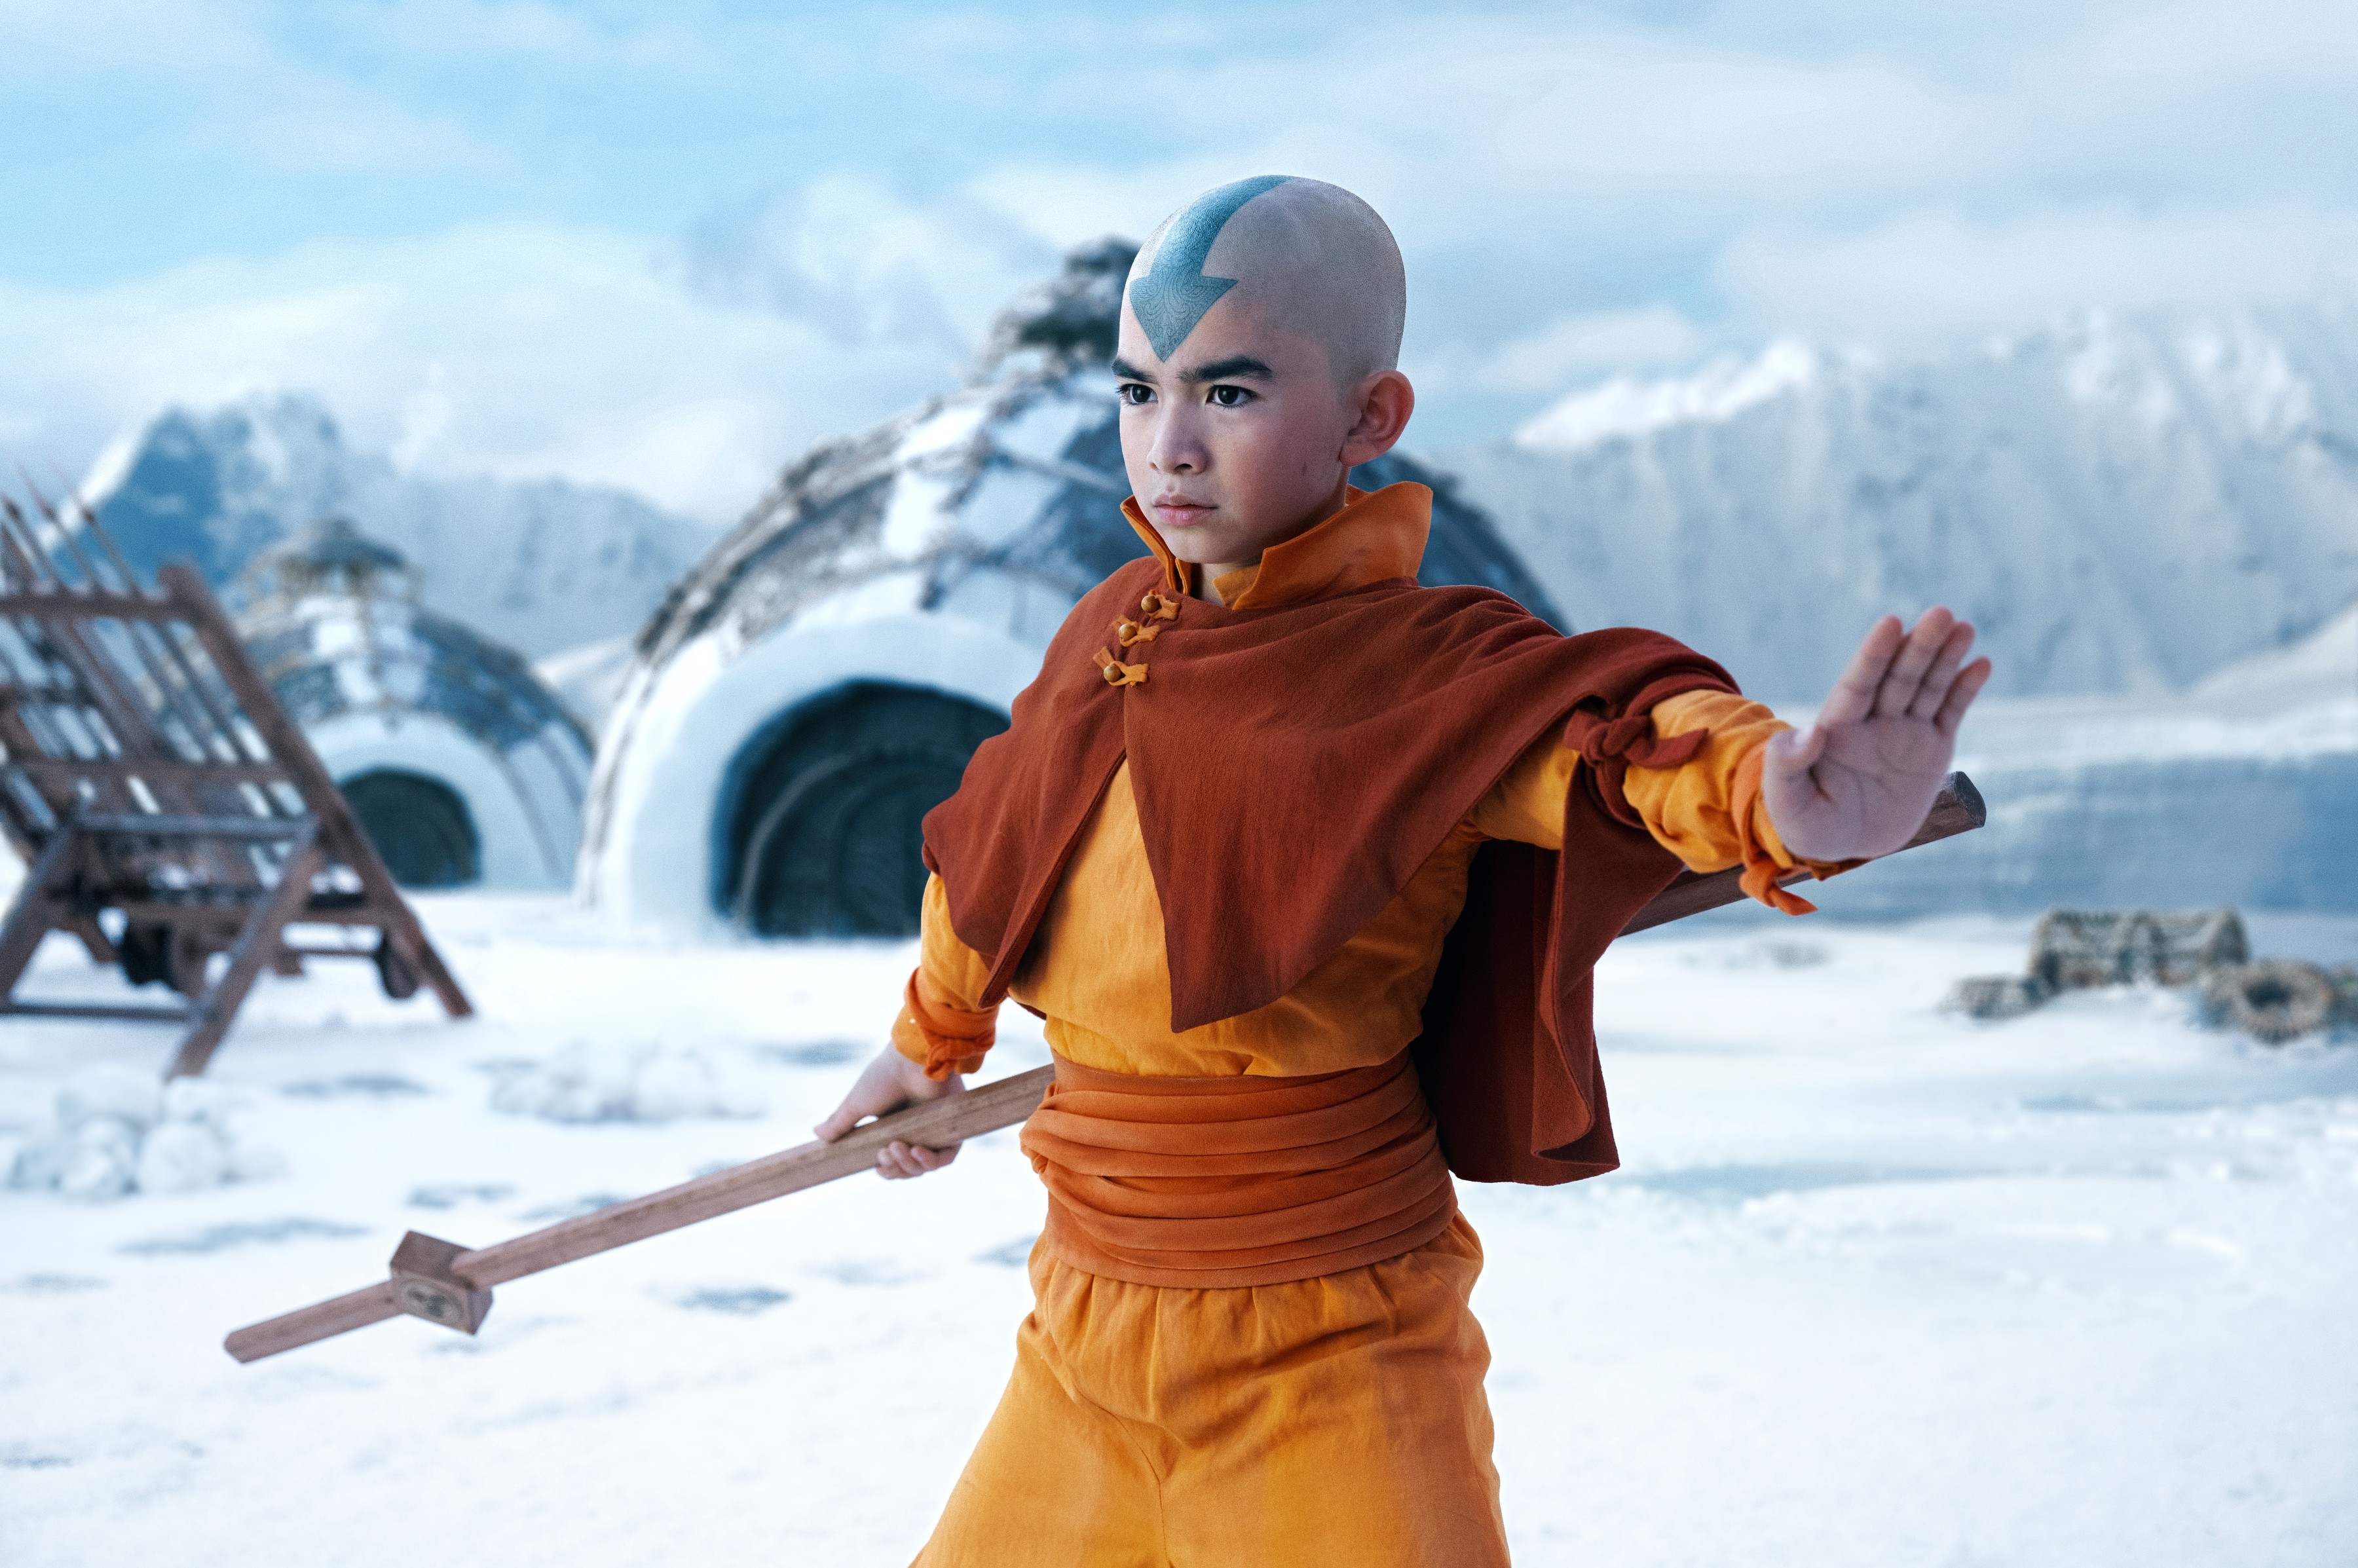 Gordon Cormier as Aang in a still from Avatar: the Last Airbender. The eight-episode adventure on Netflix is a faithful adaptation of the original animated series. Photo: Netflix